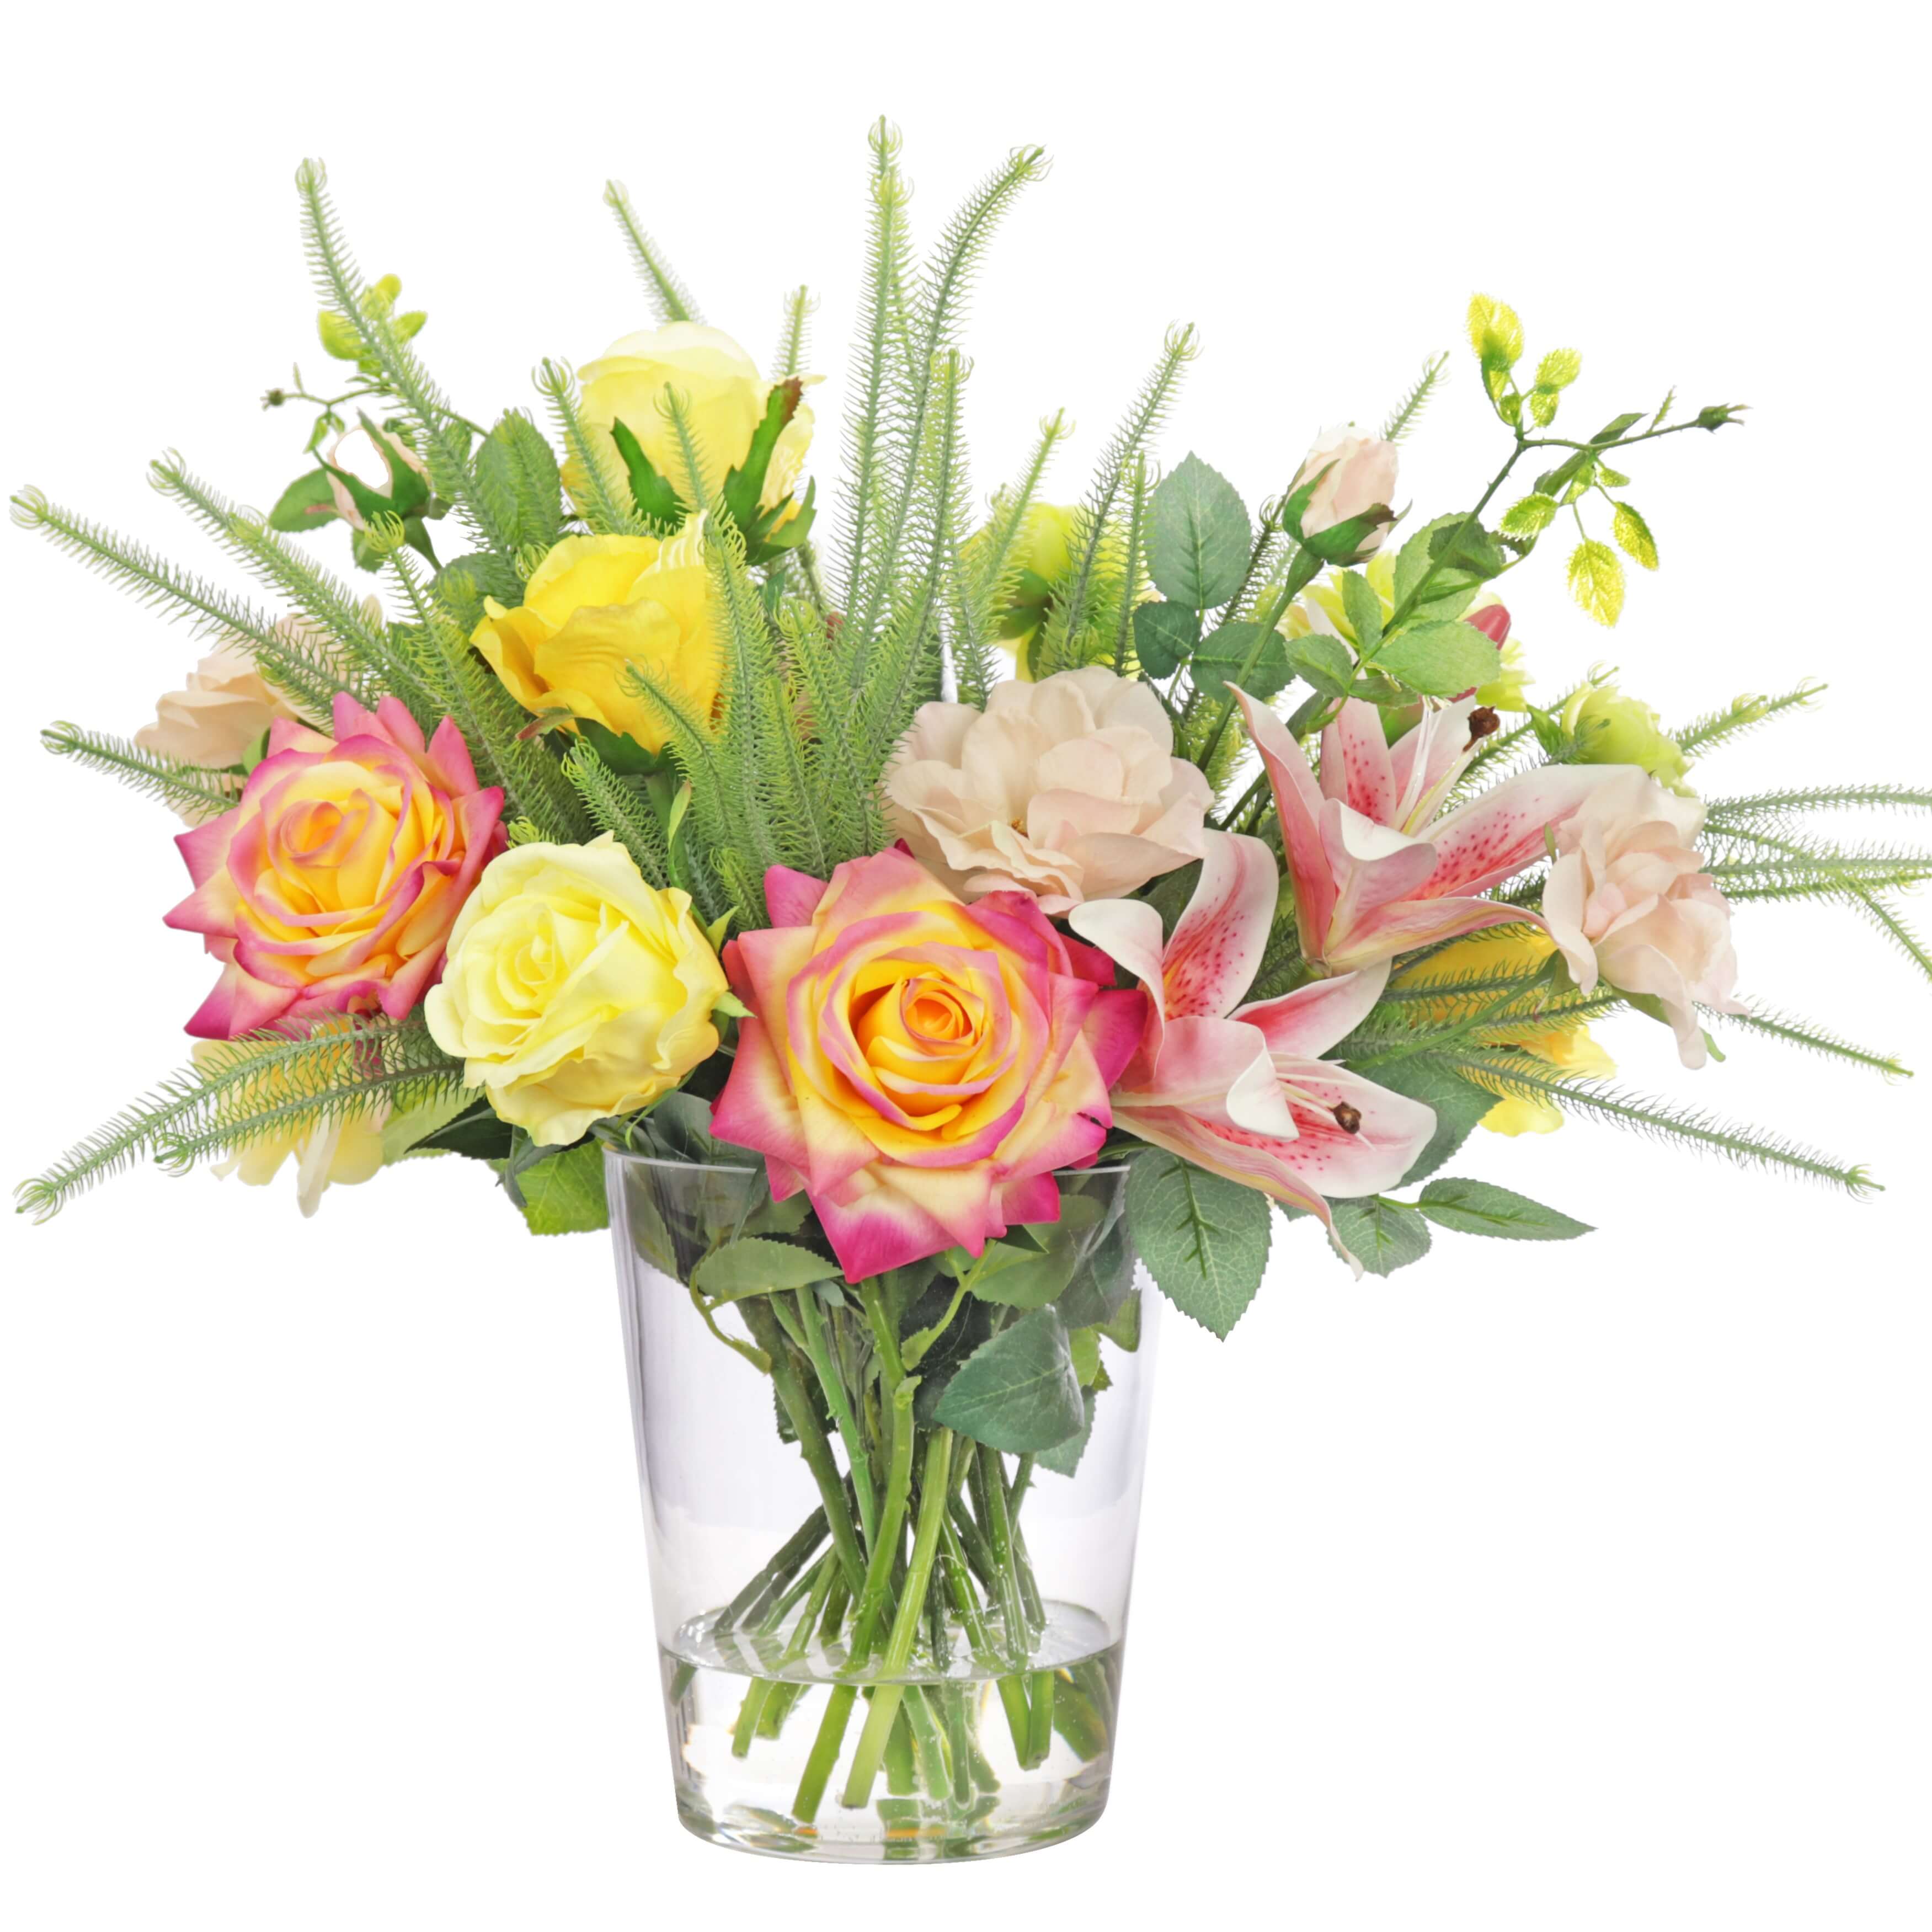 Artificial Mixed Flower Arrangements in glass vases available online